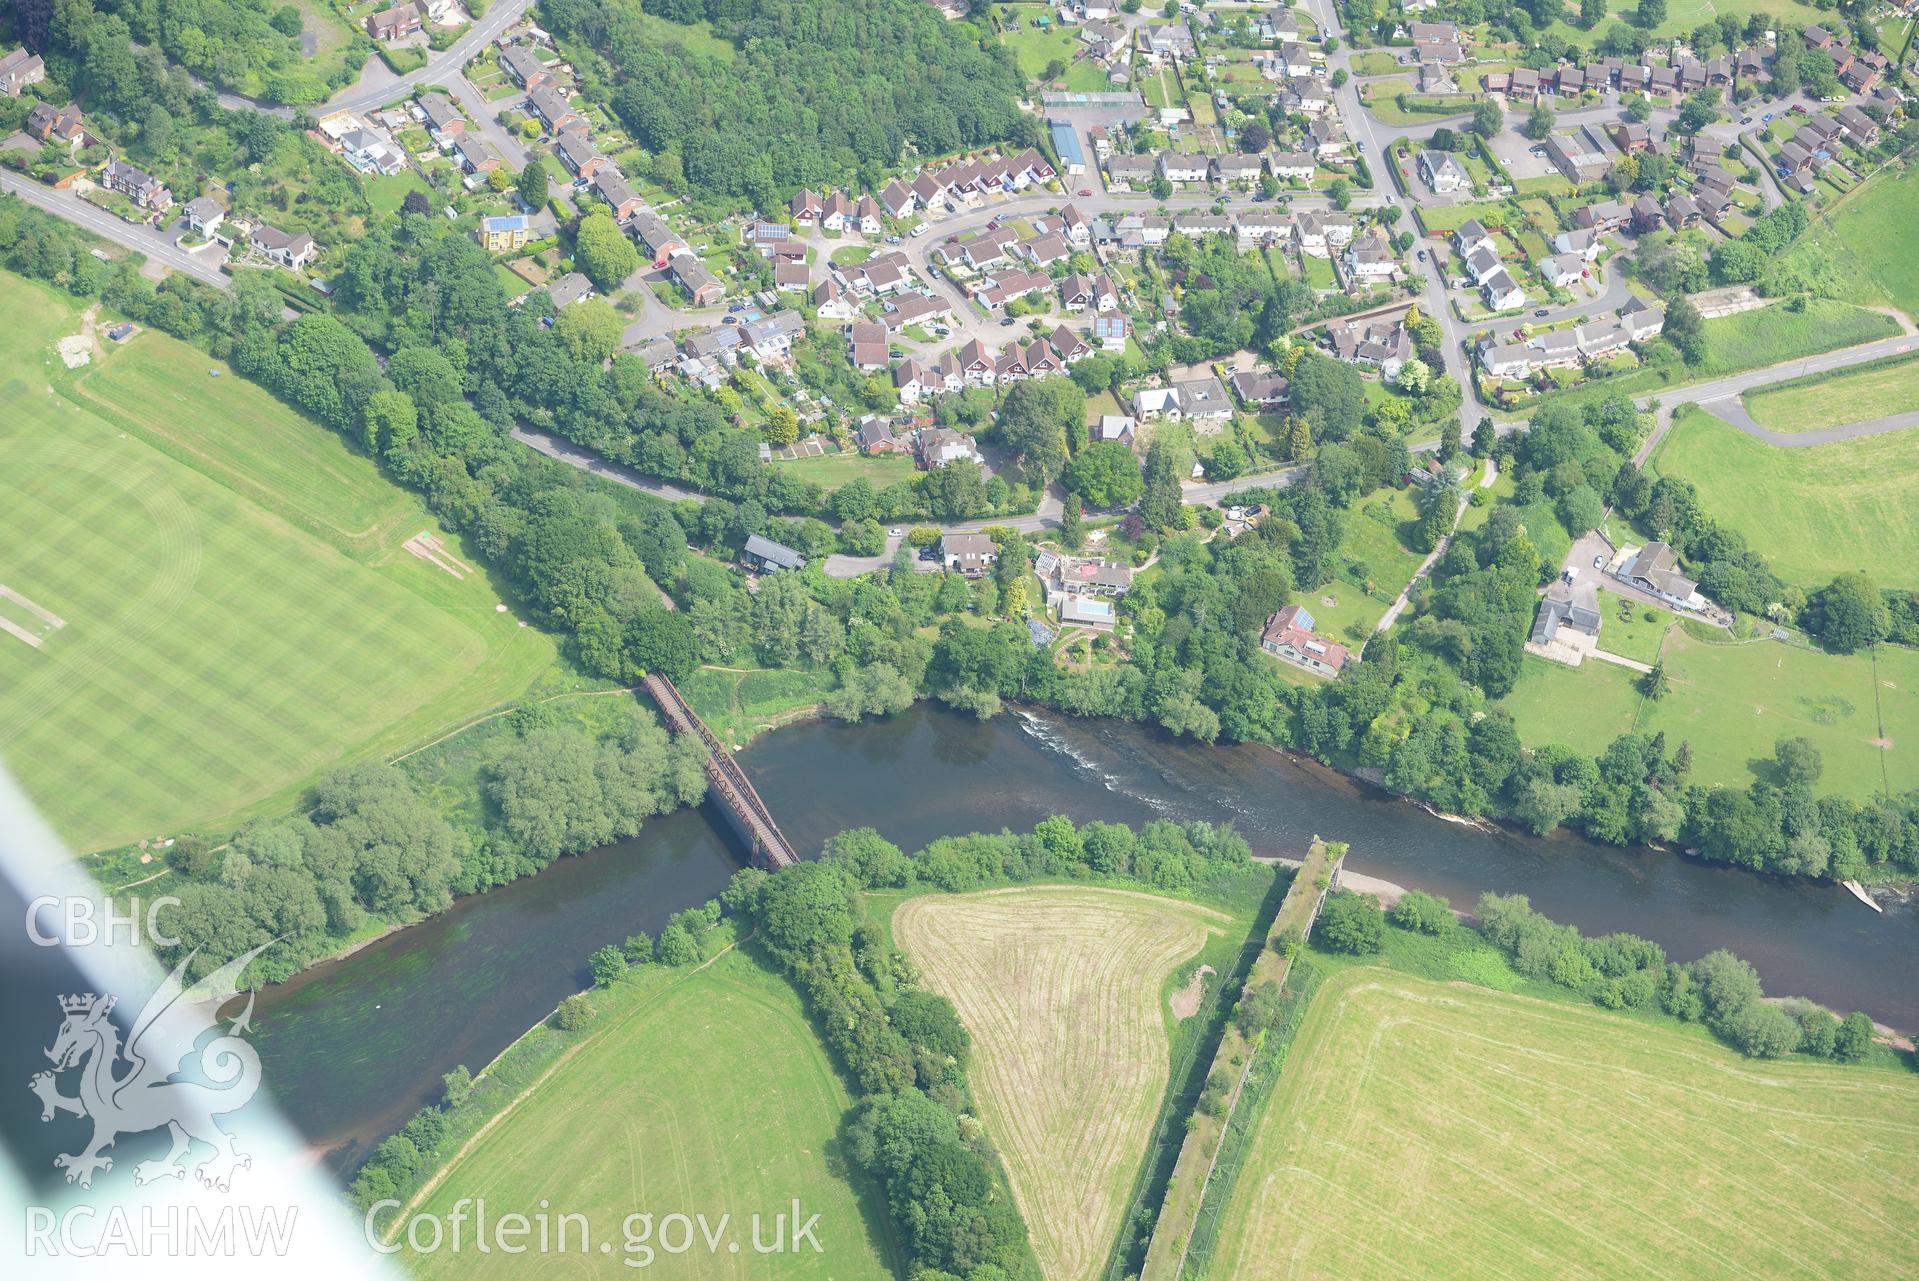 Duke of Beaufort Bridge and the Wye Viaduct on the Coleford, Monmouth, Usk and Pontypool Railway, Monmouth. Oblique aerial photograph taken during the Royal Commission's programme of archaeological aerial reconnaissance by Toby Driver on 11th June 2015.